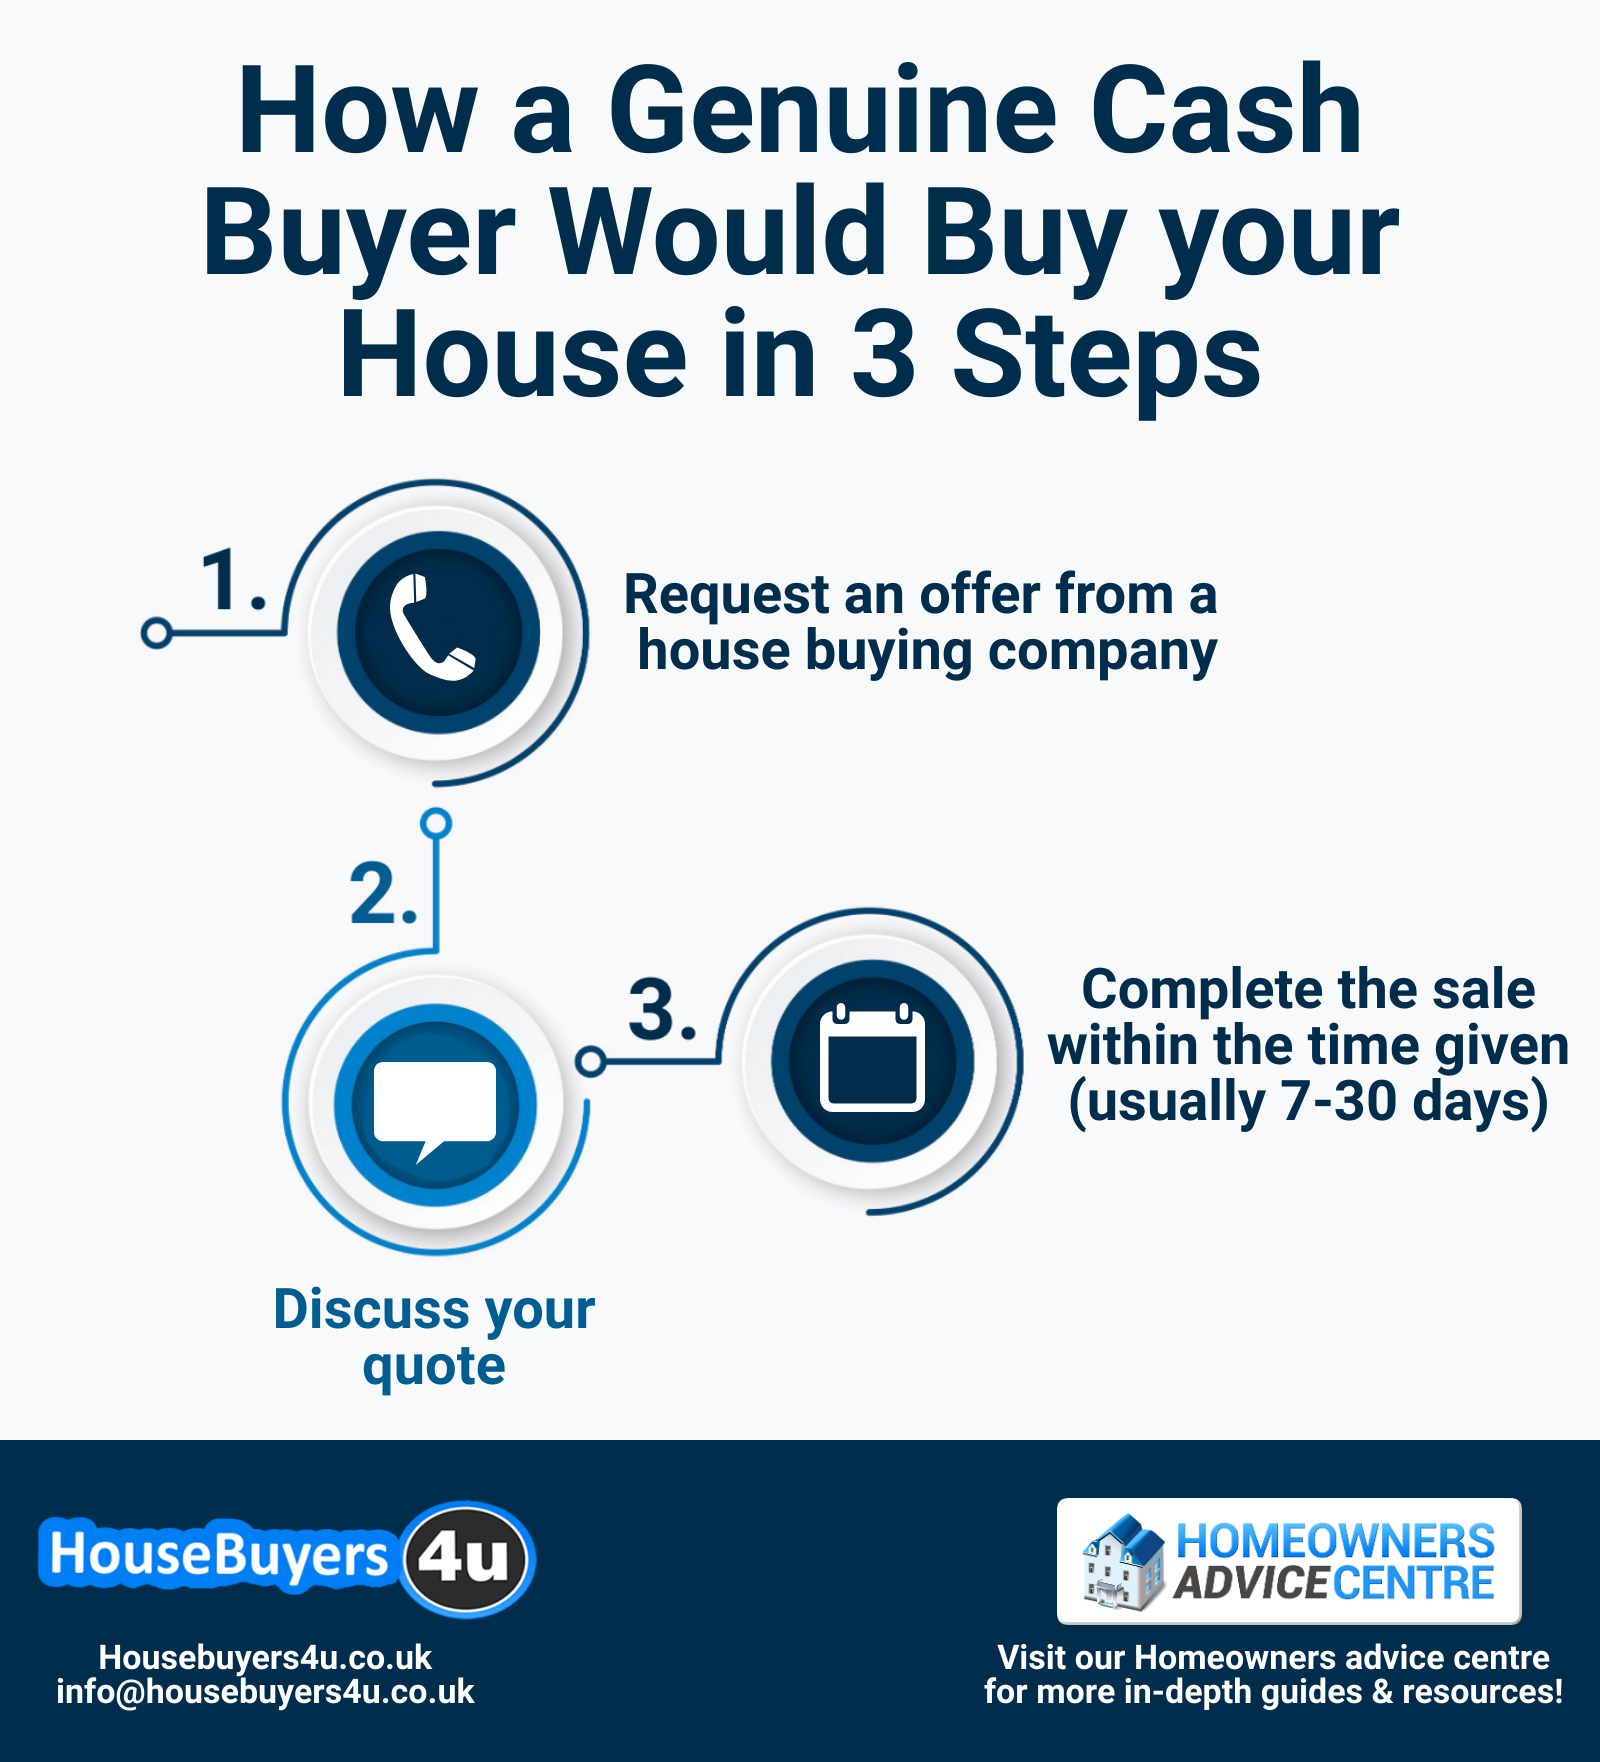 How a genuine cash buyer would buy your house in 3 steps